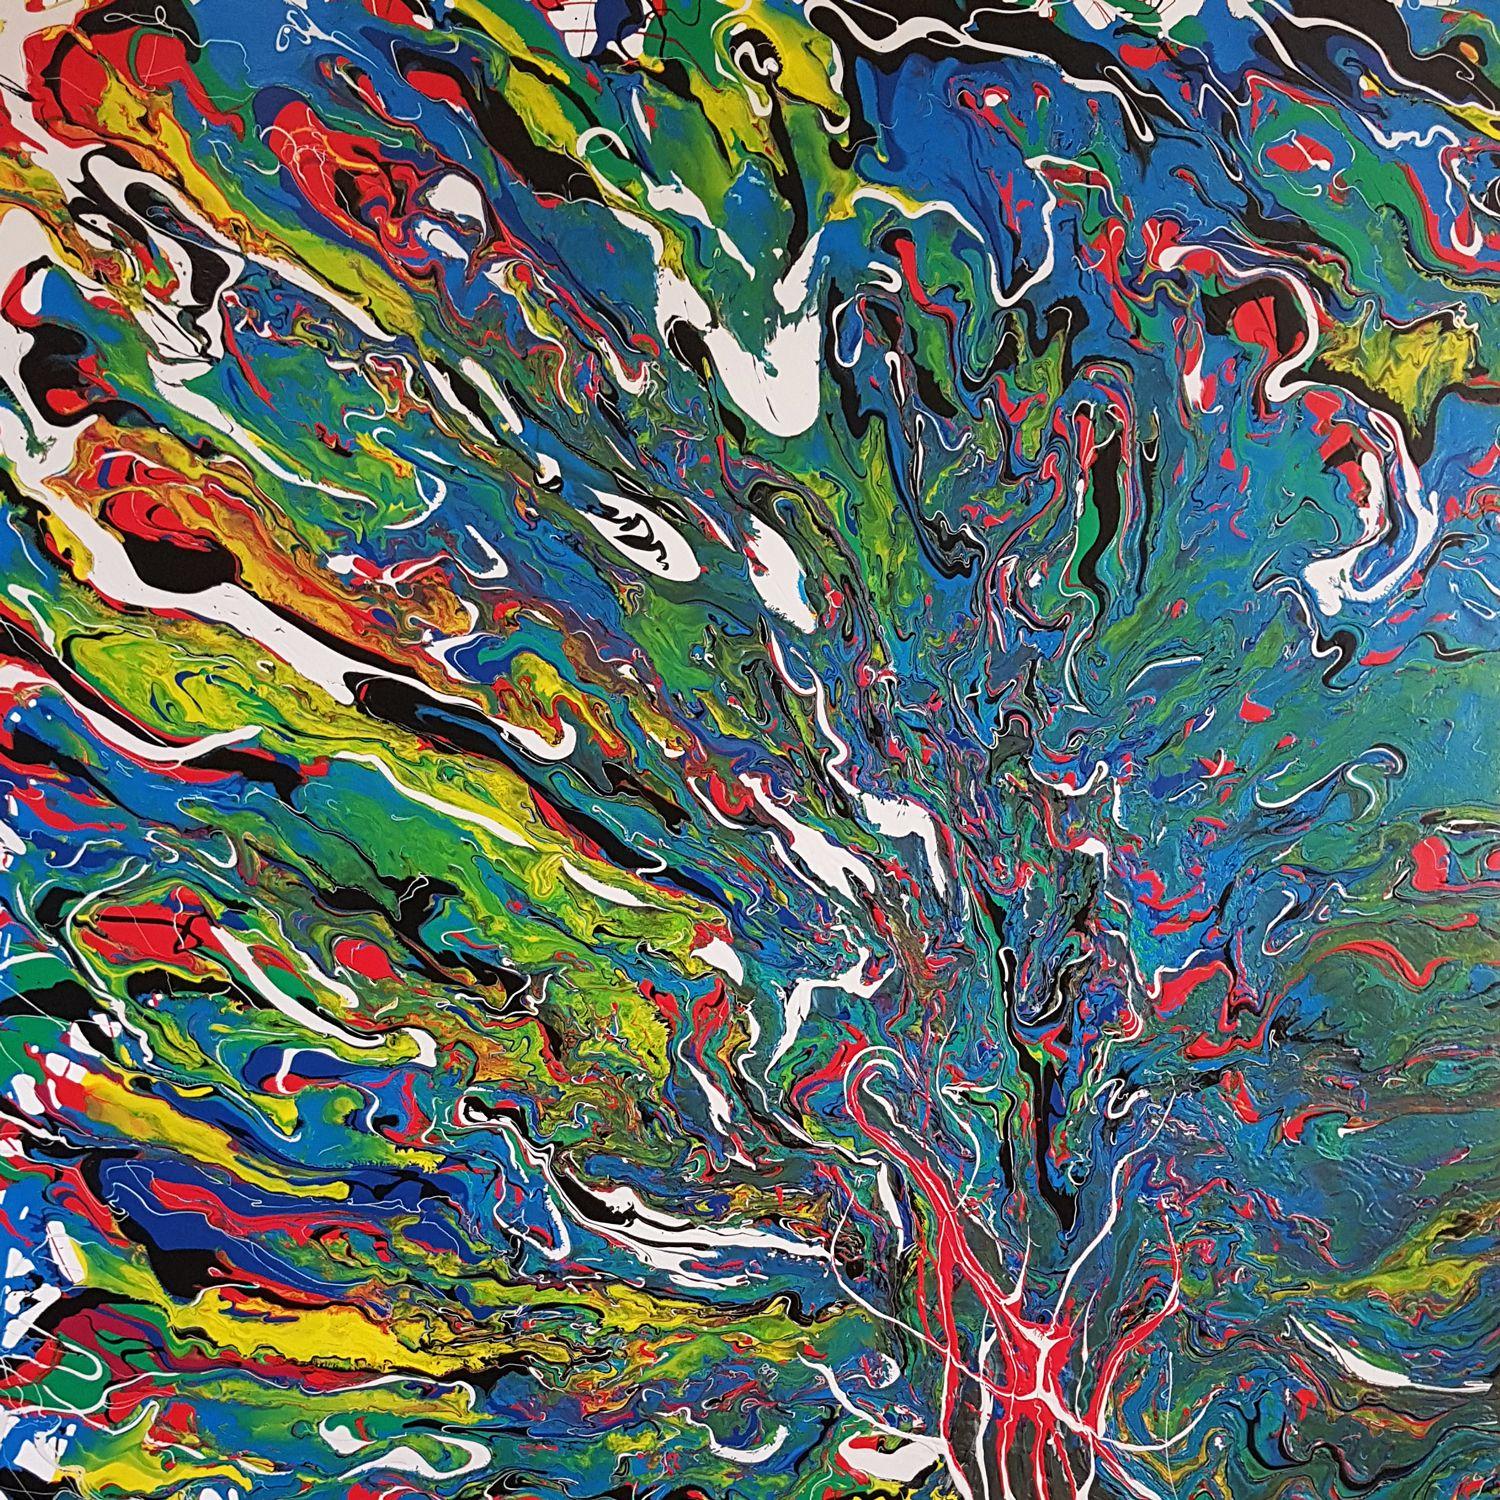 Flowing movement, unique textures, and gorgeous blues interact with white, green, yellow, red, and black in this large abstract expressionism painting. A custom-made wood canvas was painted with 3" thick white sides; the white basecoat, with random